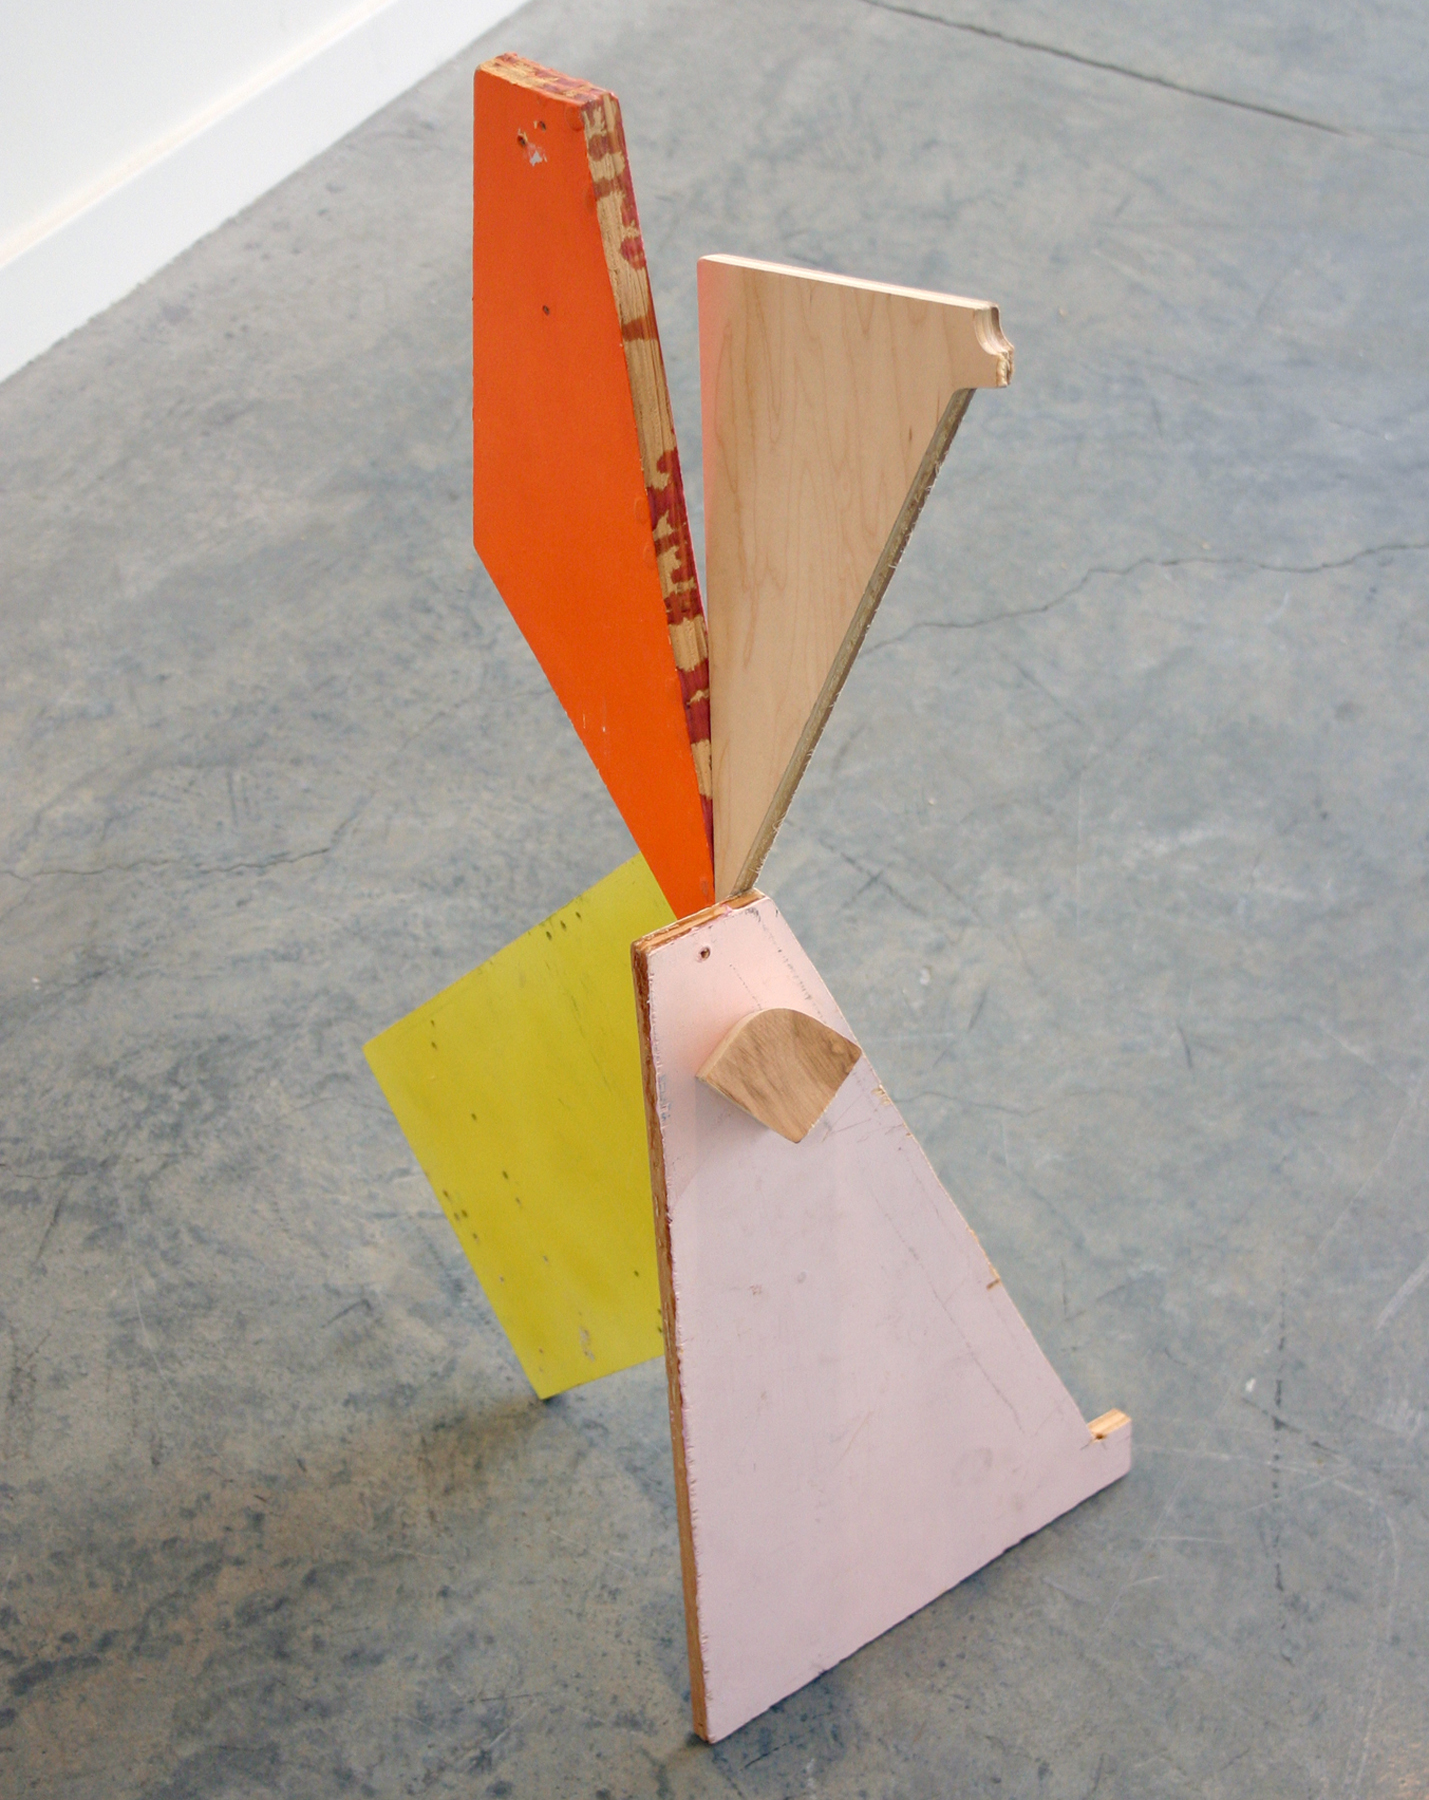   KIRK STOLLER   Untitled (jammed),&nbsp; wood, paint and resin, 29" x 15" x 10.75", 2011 